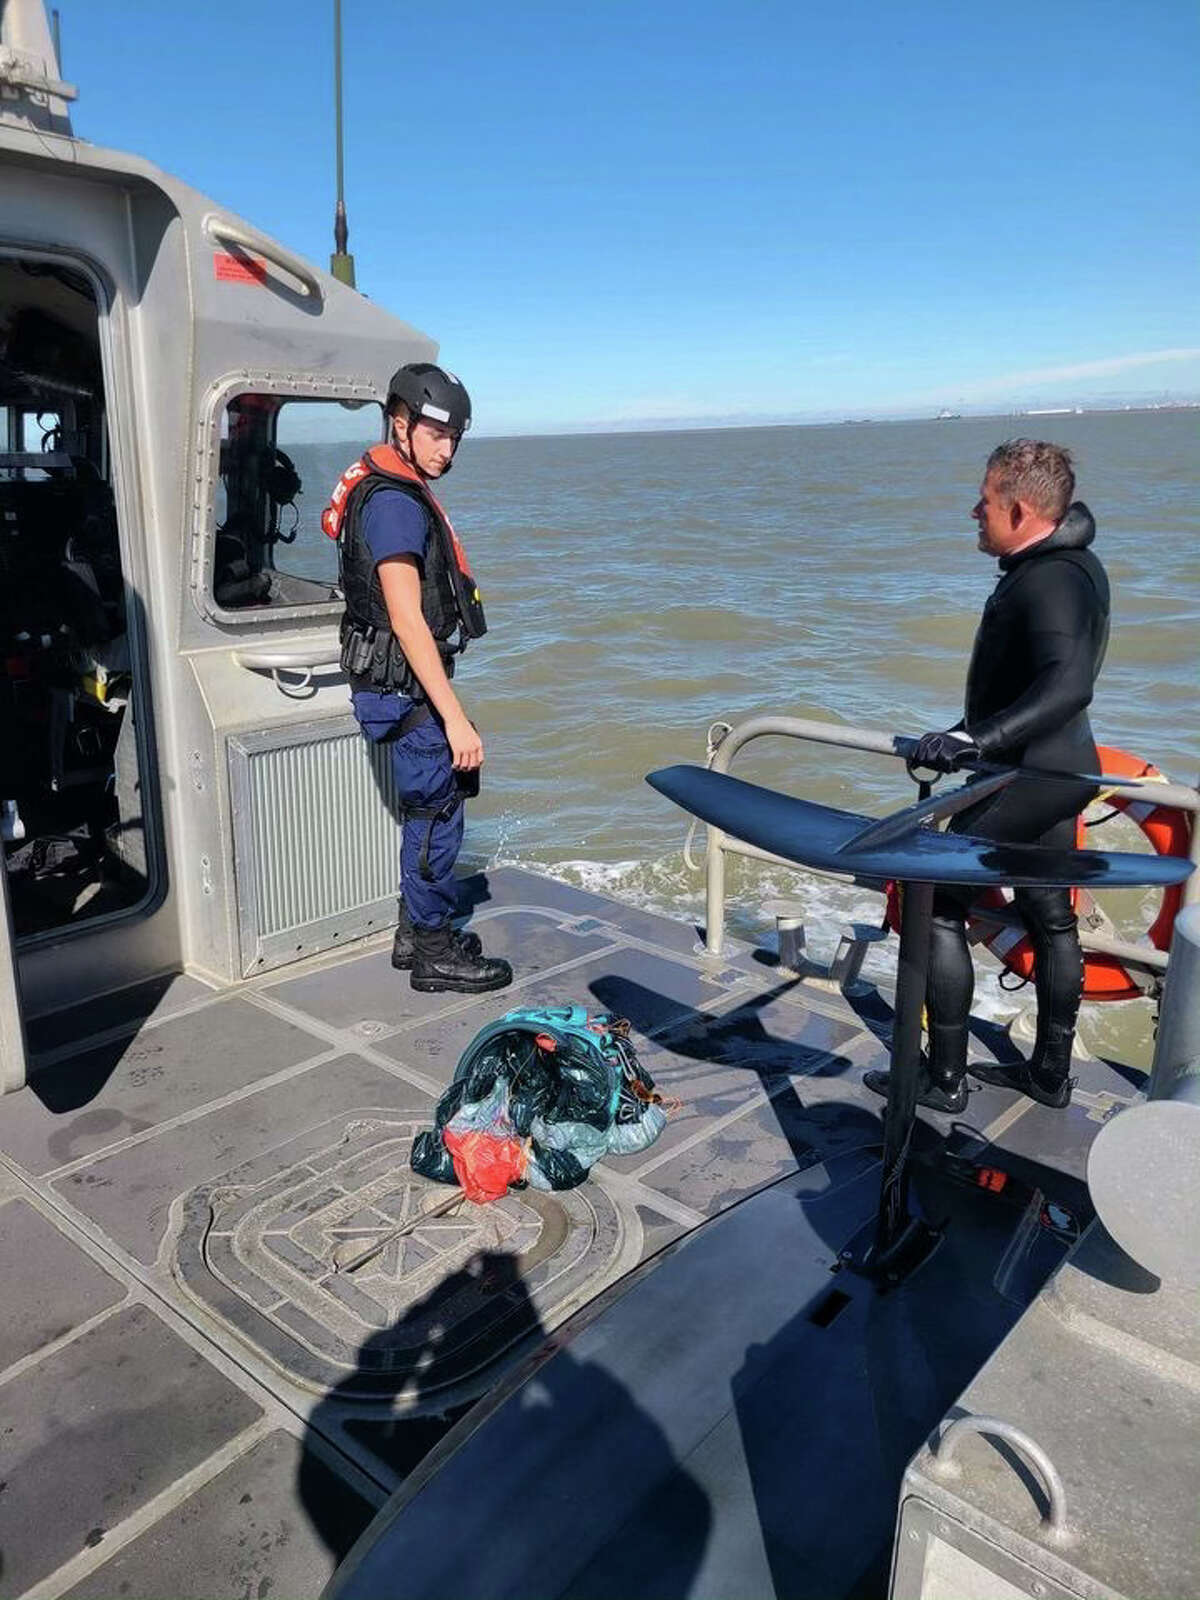 The U.S. Coast Guard recently saved a Texas kite surfer stranded in the Gulf, clinging to wooden debris.